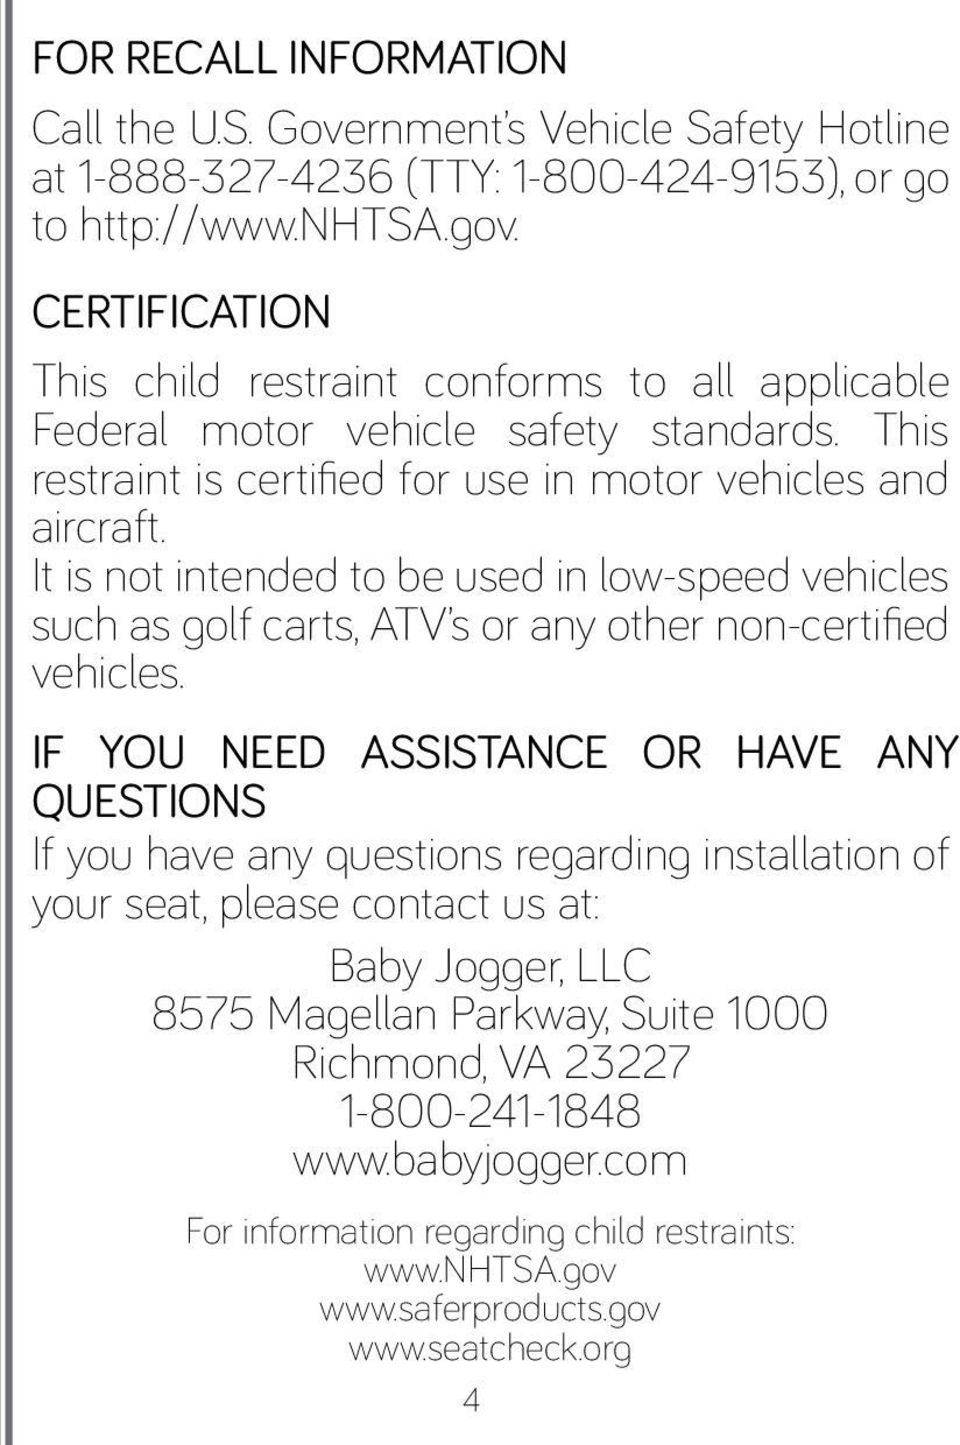 It is not intended to be used in low-speed vehicles such as golf carts, ATV s or any other non-certified vehicles.